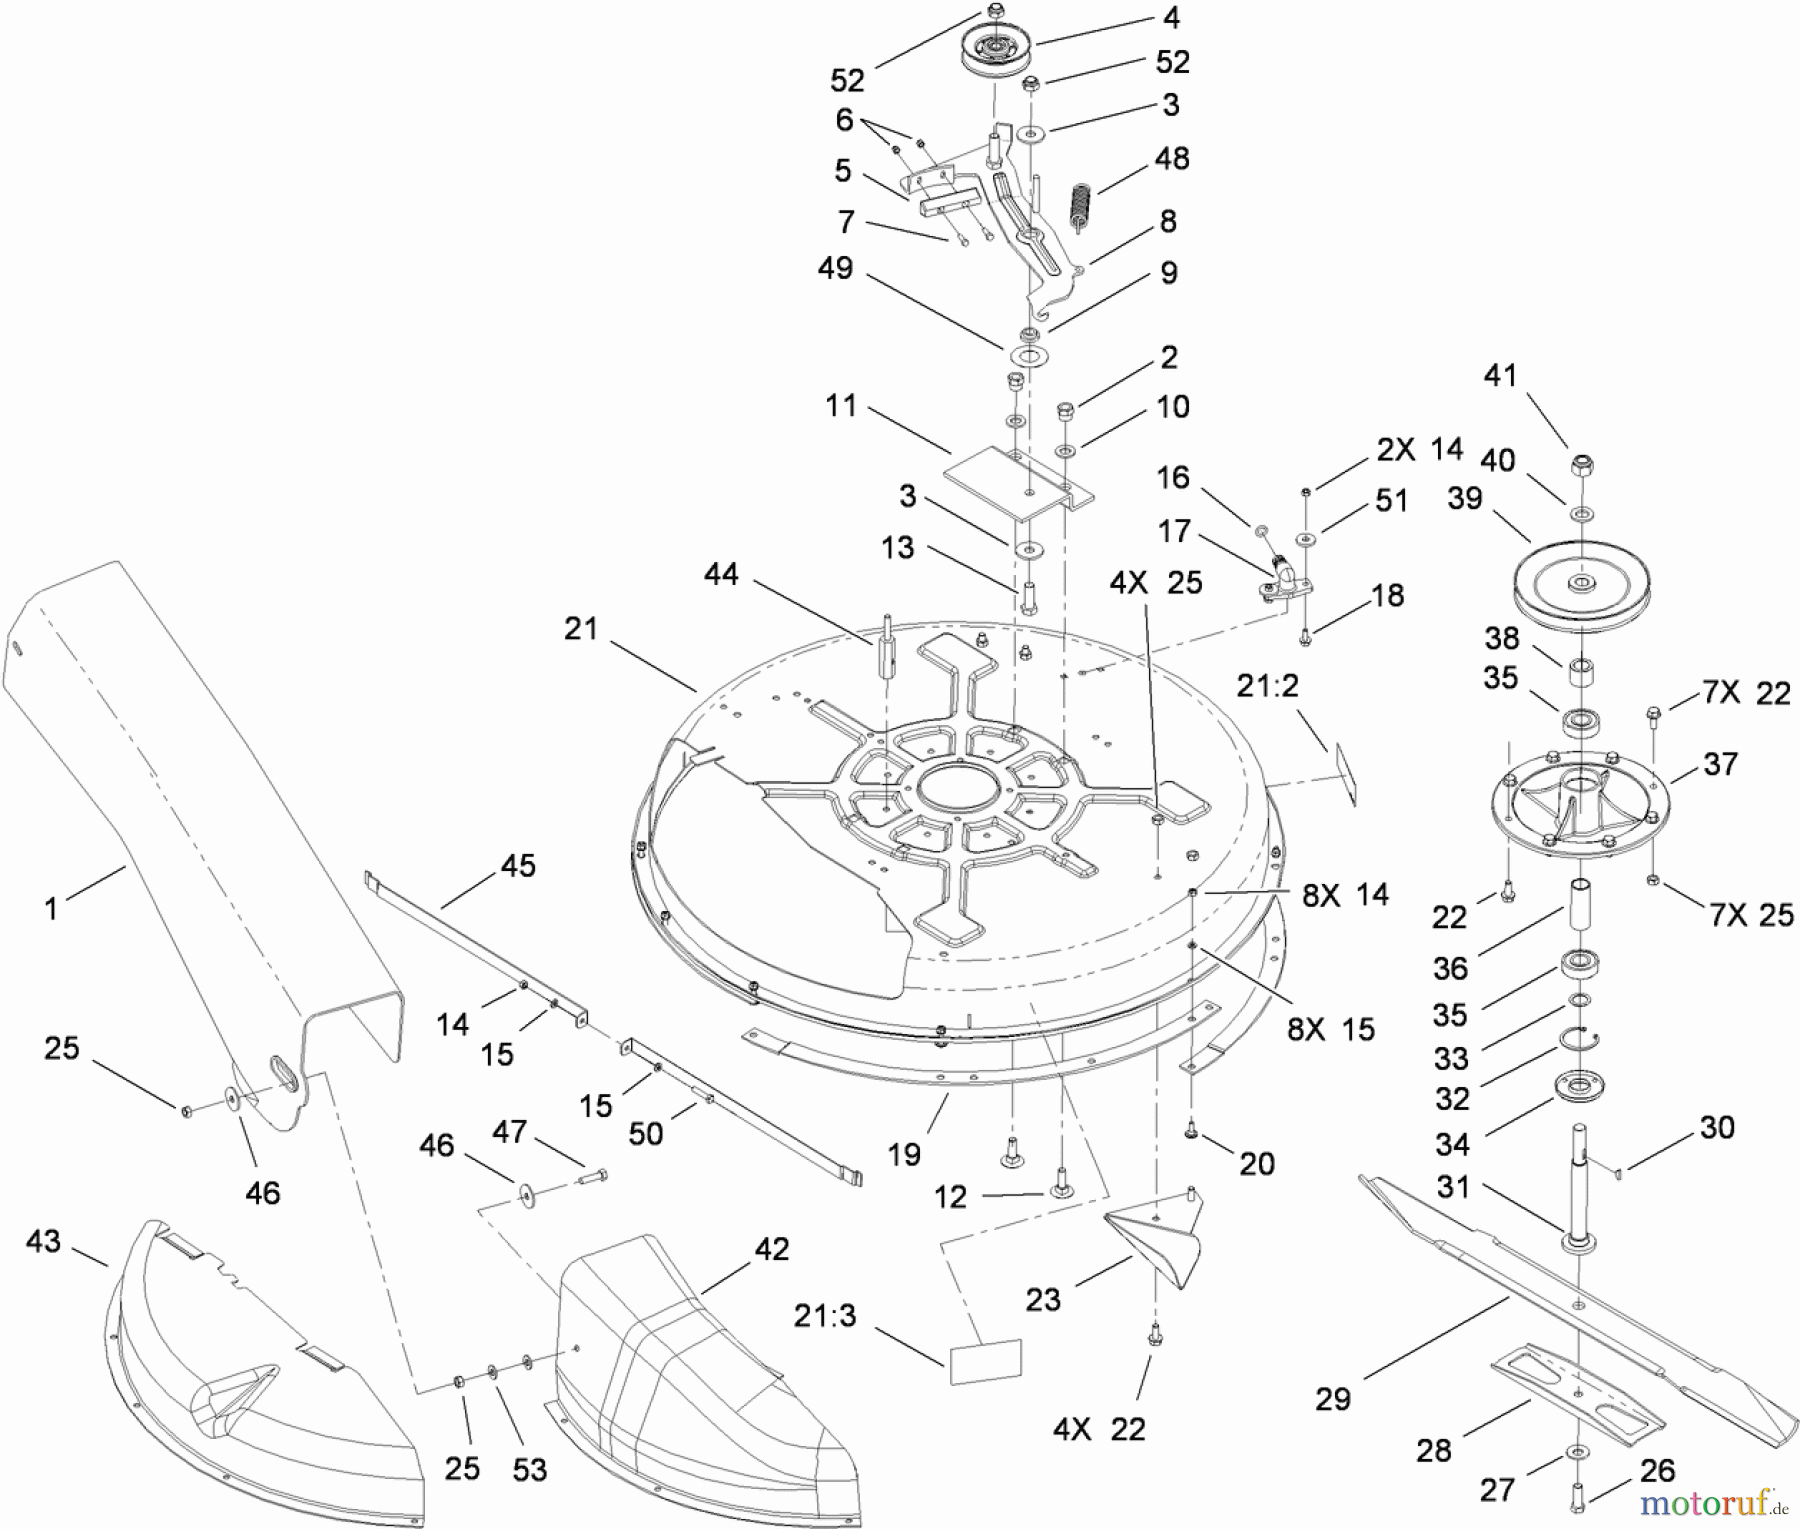  Toro Neu Mowers, Rear-Engine Rider 70185 (G132) - Toro G132 Rear-Engine Riding Mower, 2010 (310000001-310999999) DECK AND SPINDLE ASSEMBLY